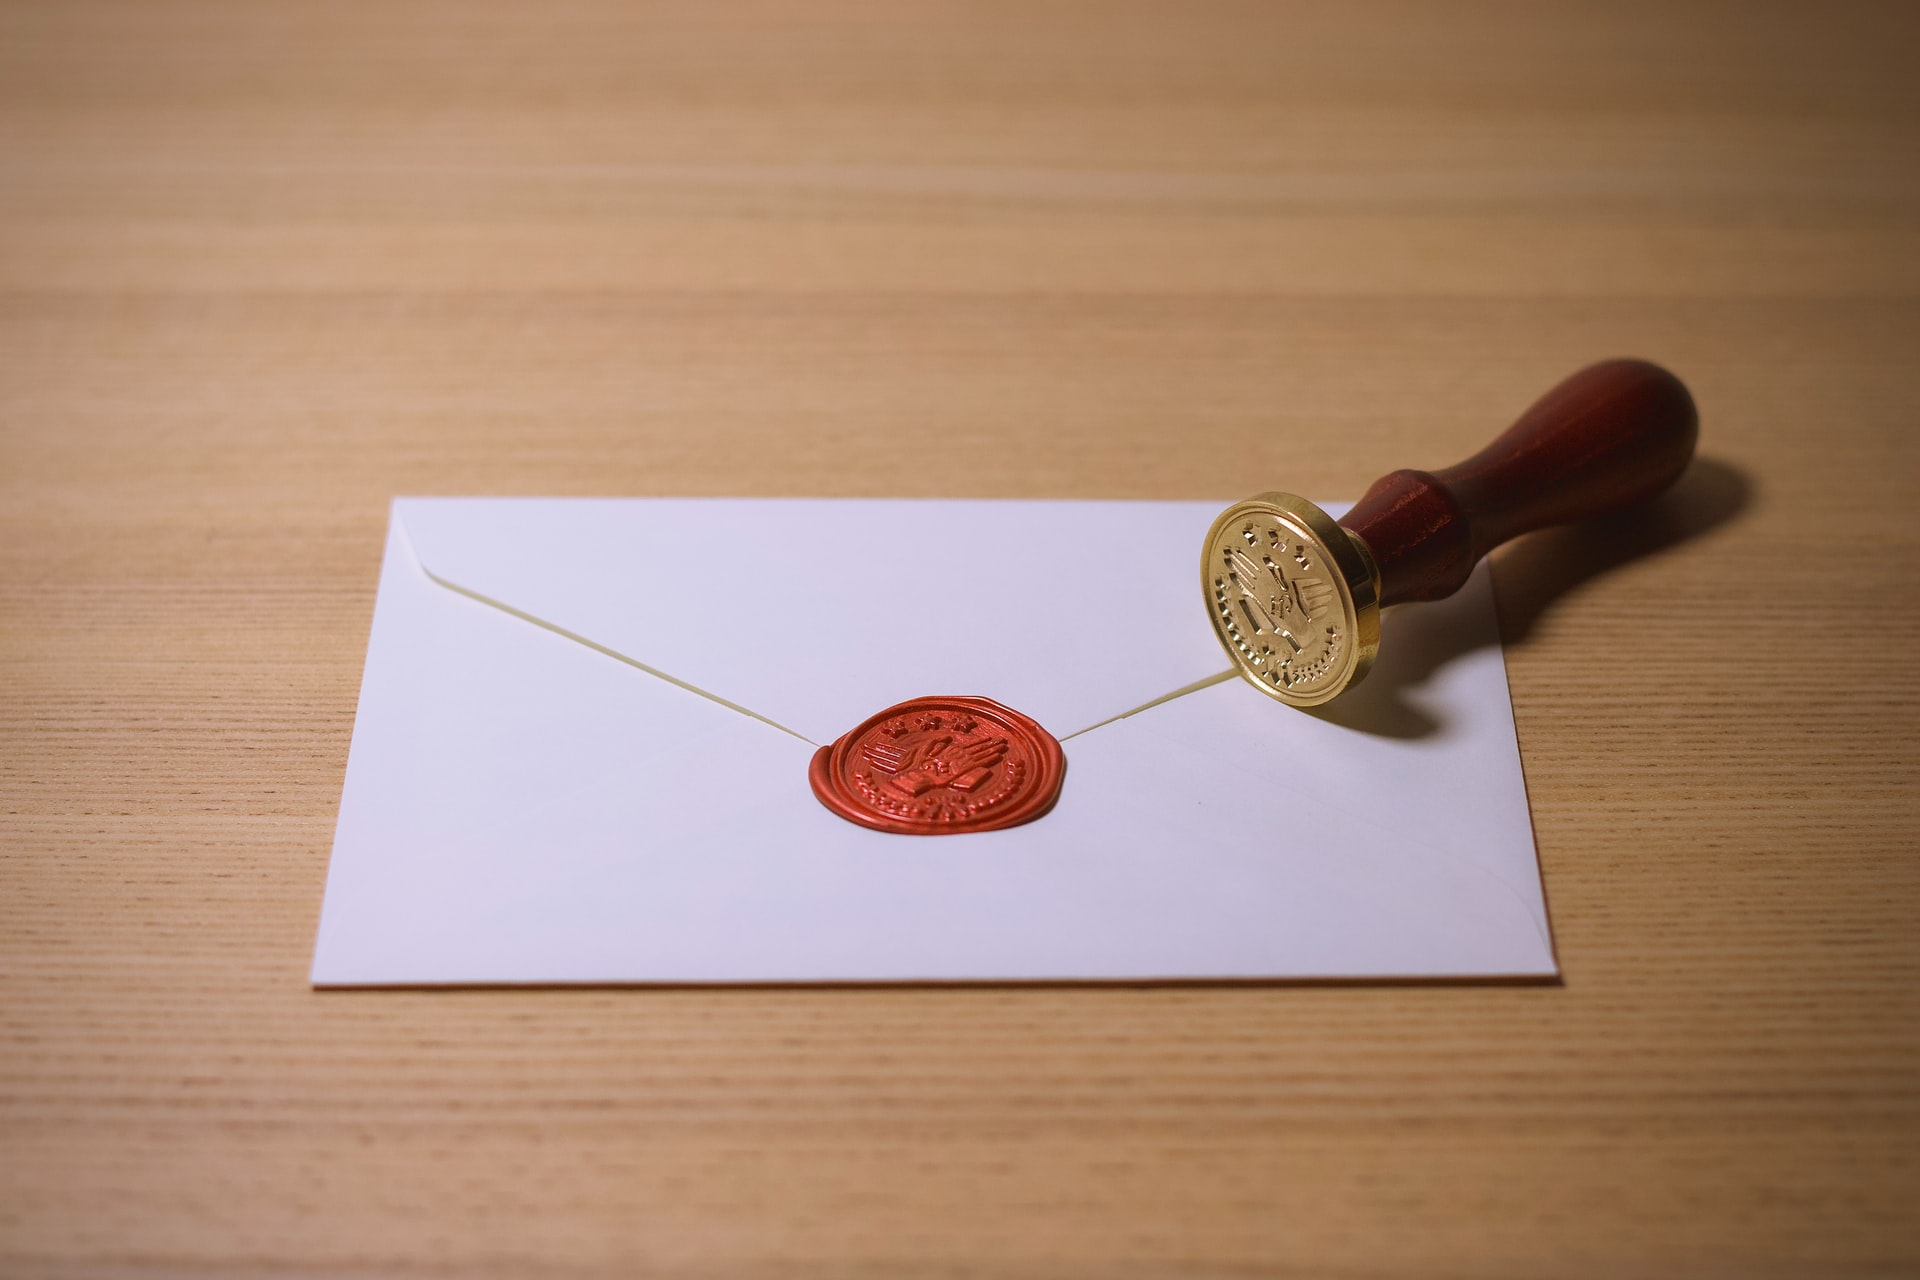 Is Sealing Wax Bad For The Environment